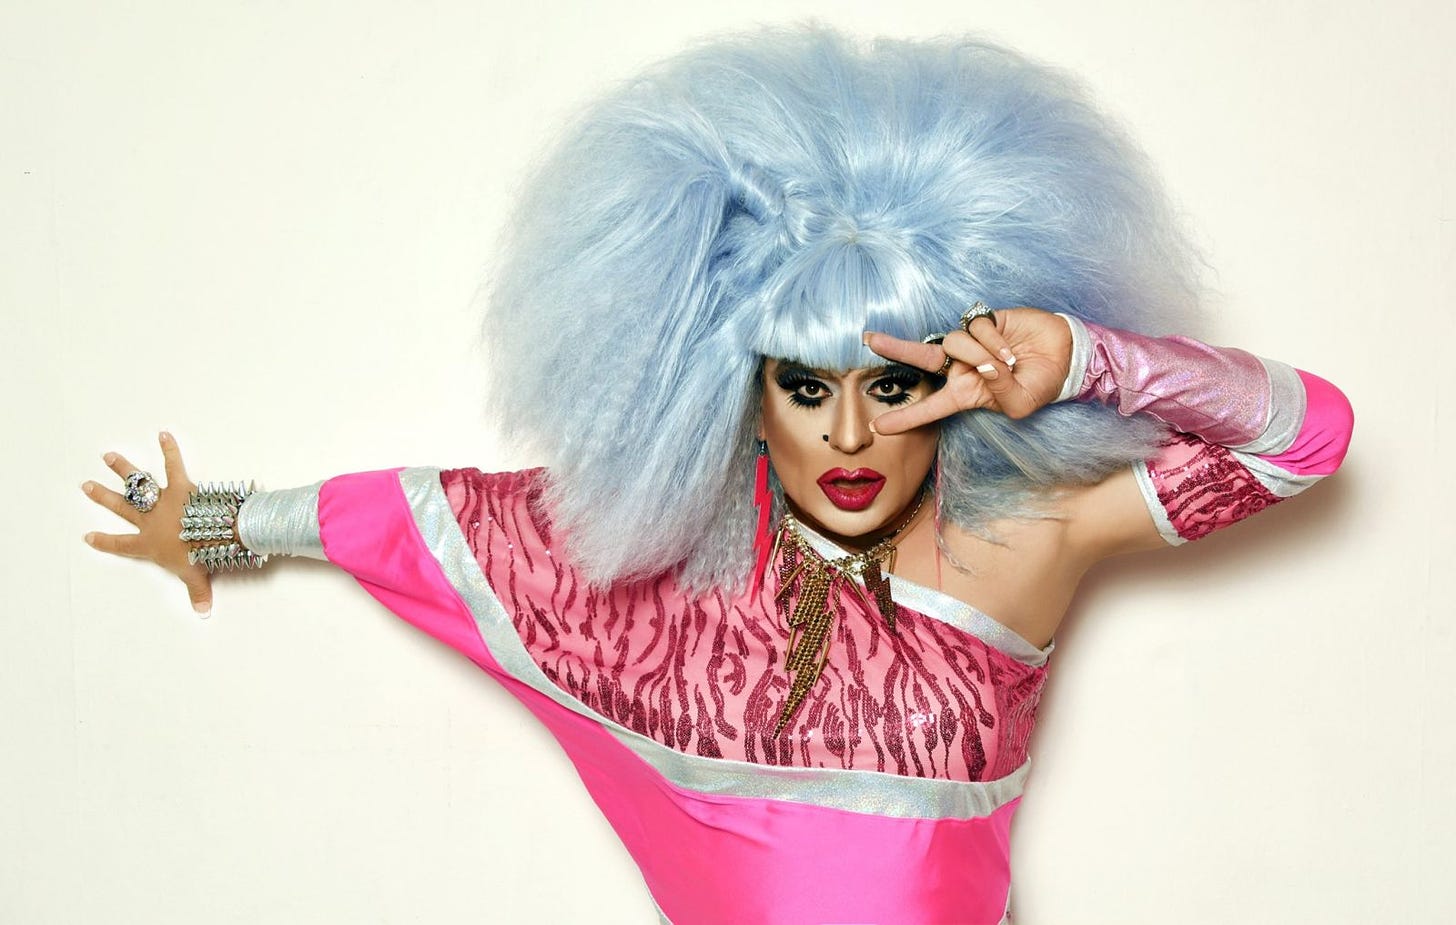 Against a white backdrop, a drag queen wearing a big icey blue wig and dramatic makeup poses with her arms, wearing a pink asymmetrical top. 